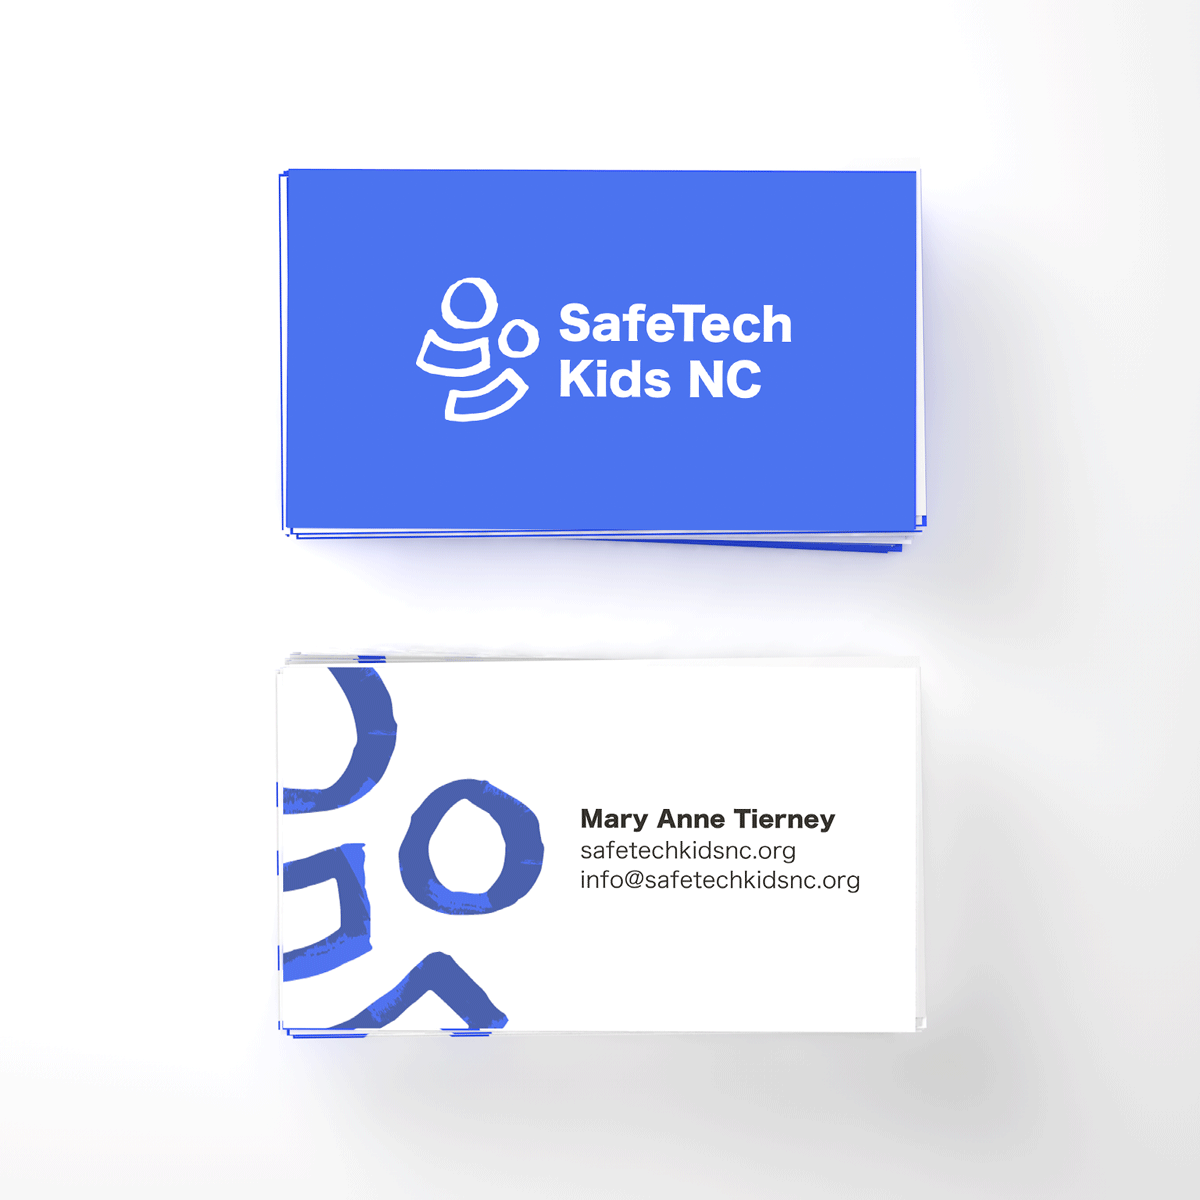 SafeTech Kids NC logo with text on a business card mockup